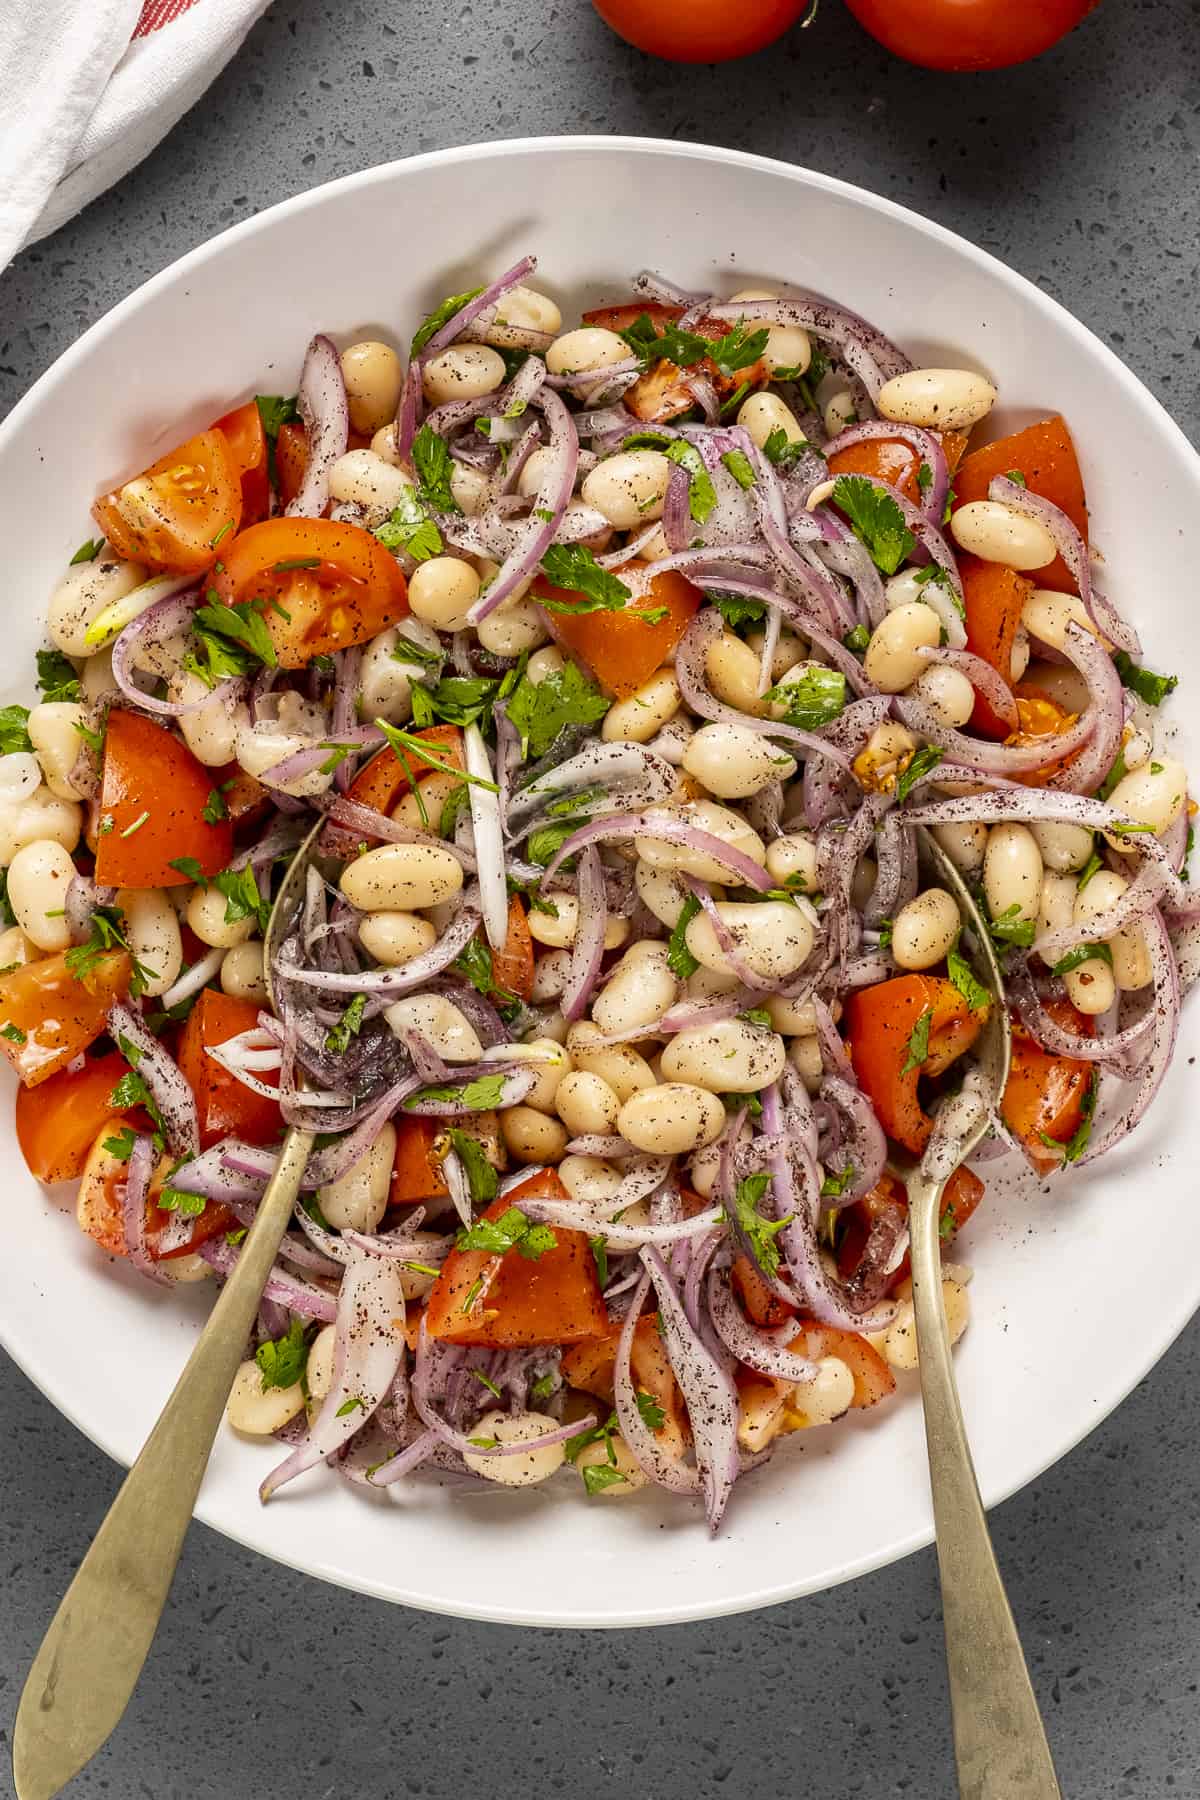 Bean salad with onions and tomatoes in a white bowl.